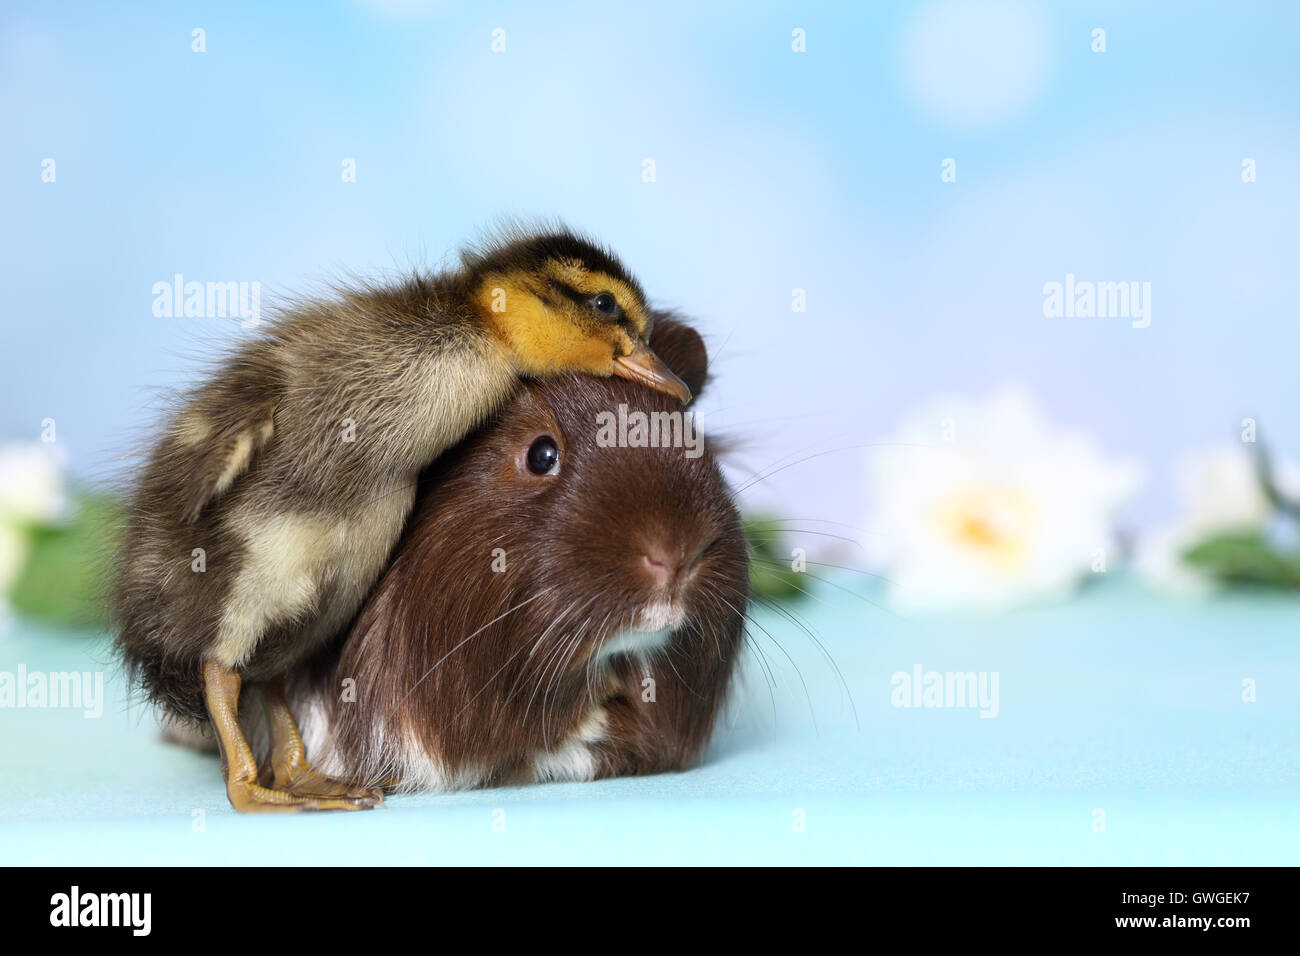 Indian Runner Duck. Duckling cuddling up to long-haired guinea pig. Studio picture against a blue background. Germany Stock Photo